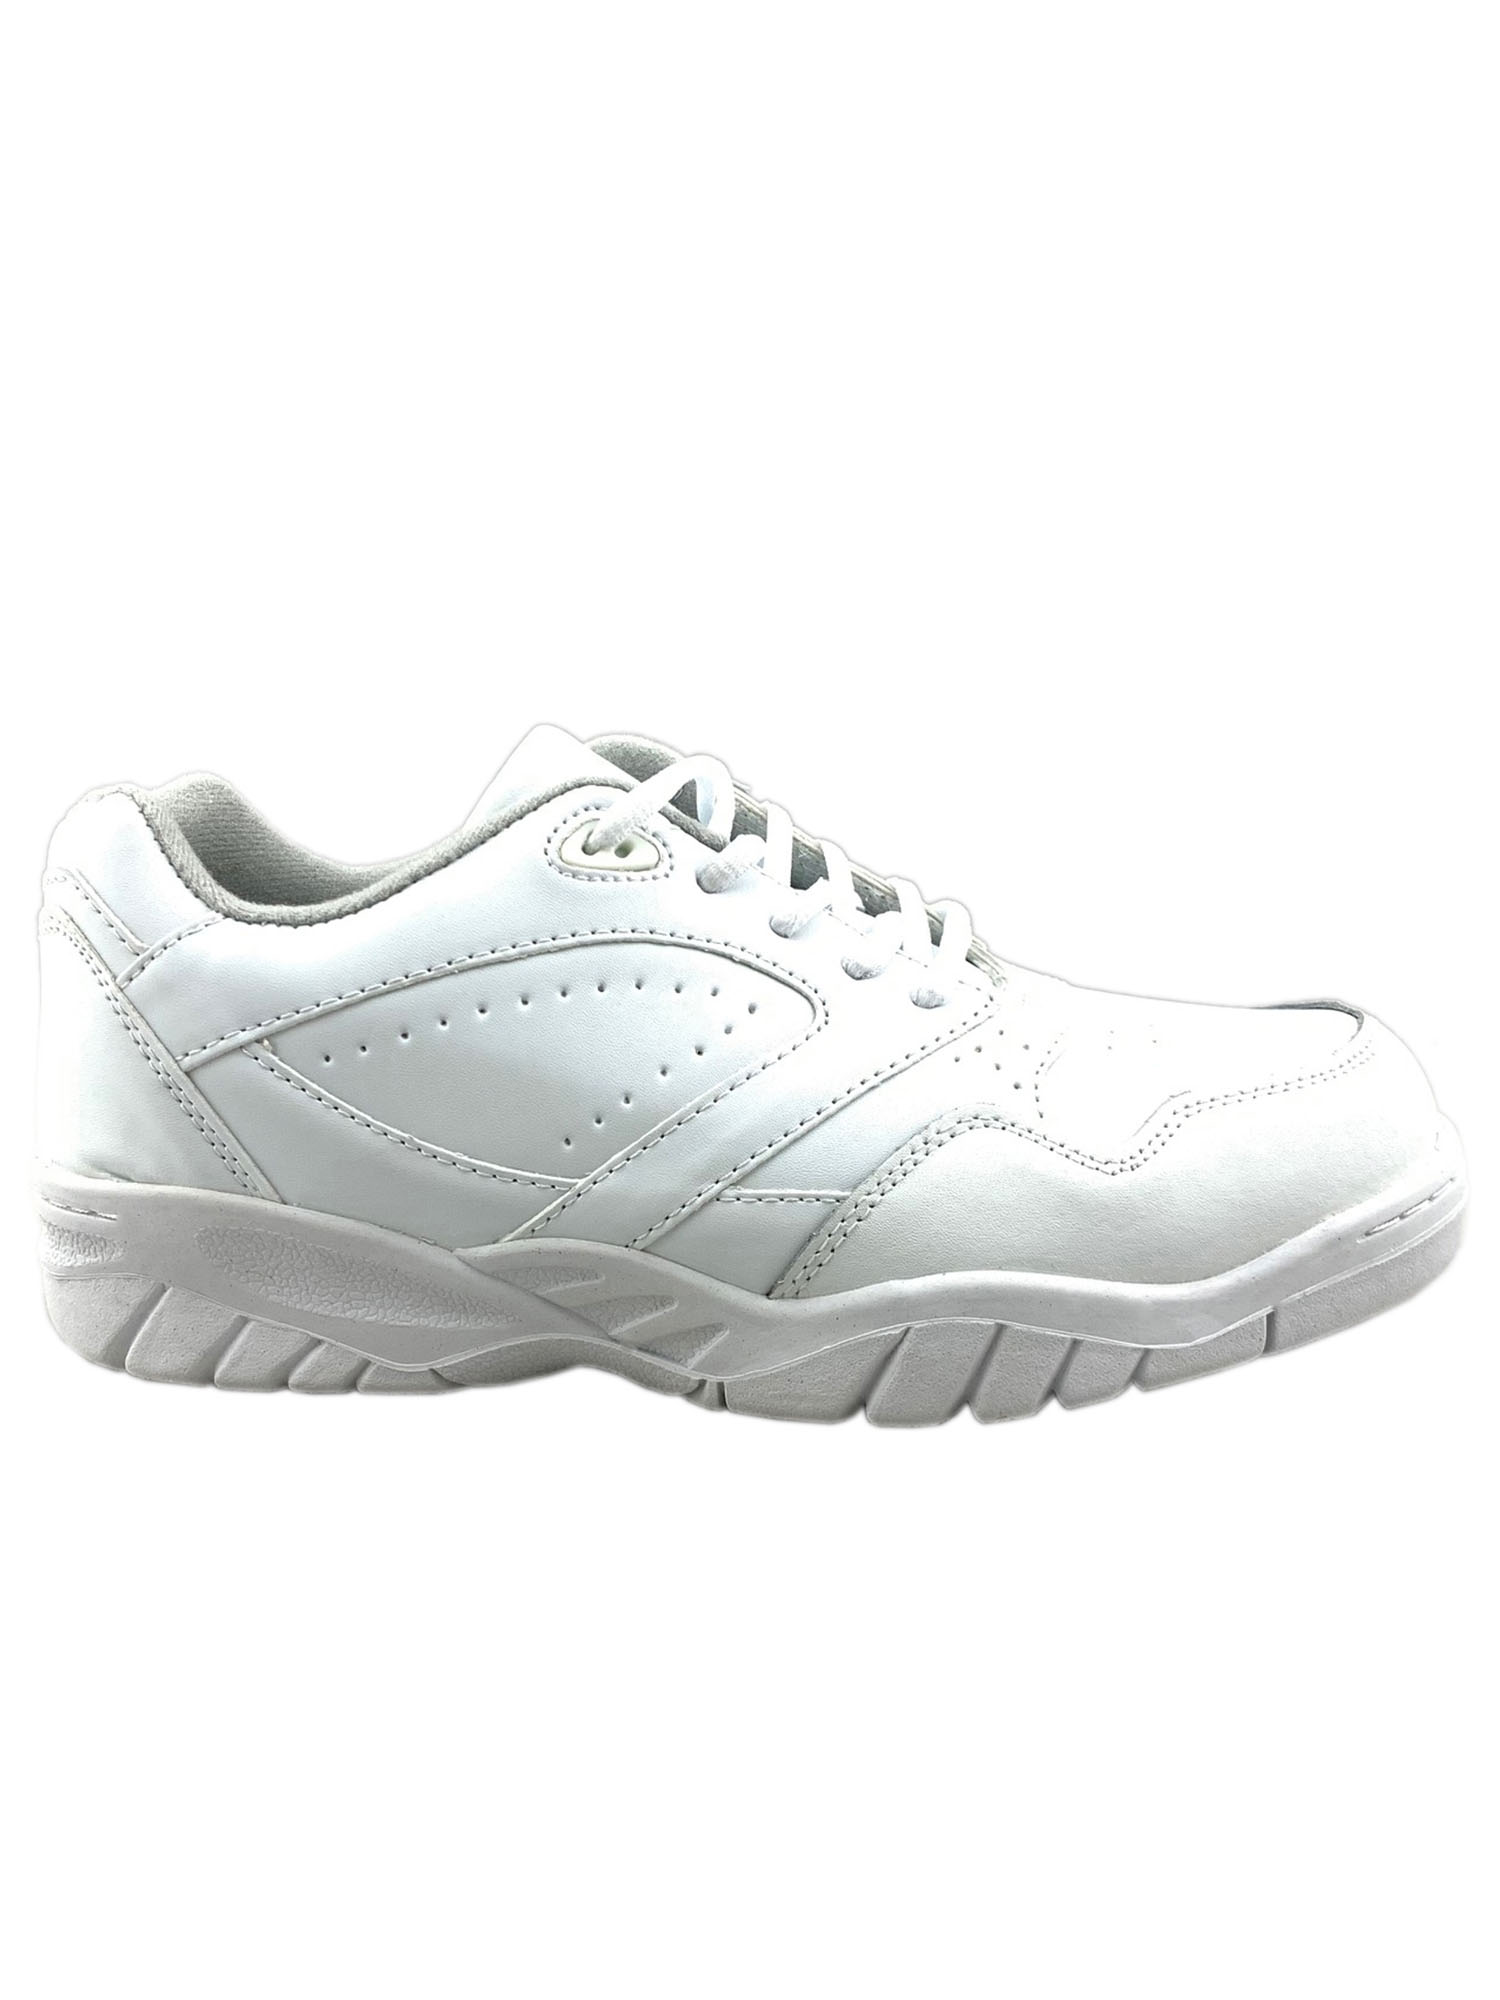 Tanleewa Men's Leather White Sports Shoes Lightweight Sneakers Breathable Casual Shoe Size 4 - image 1 of 5